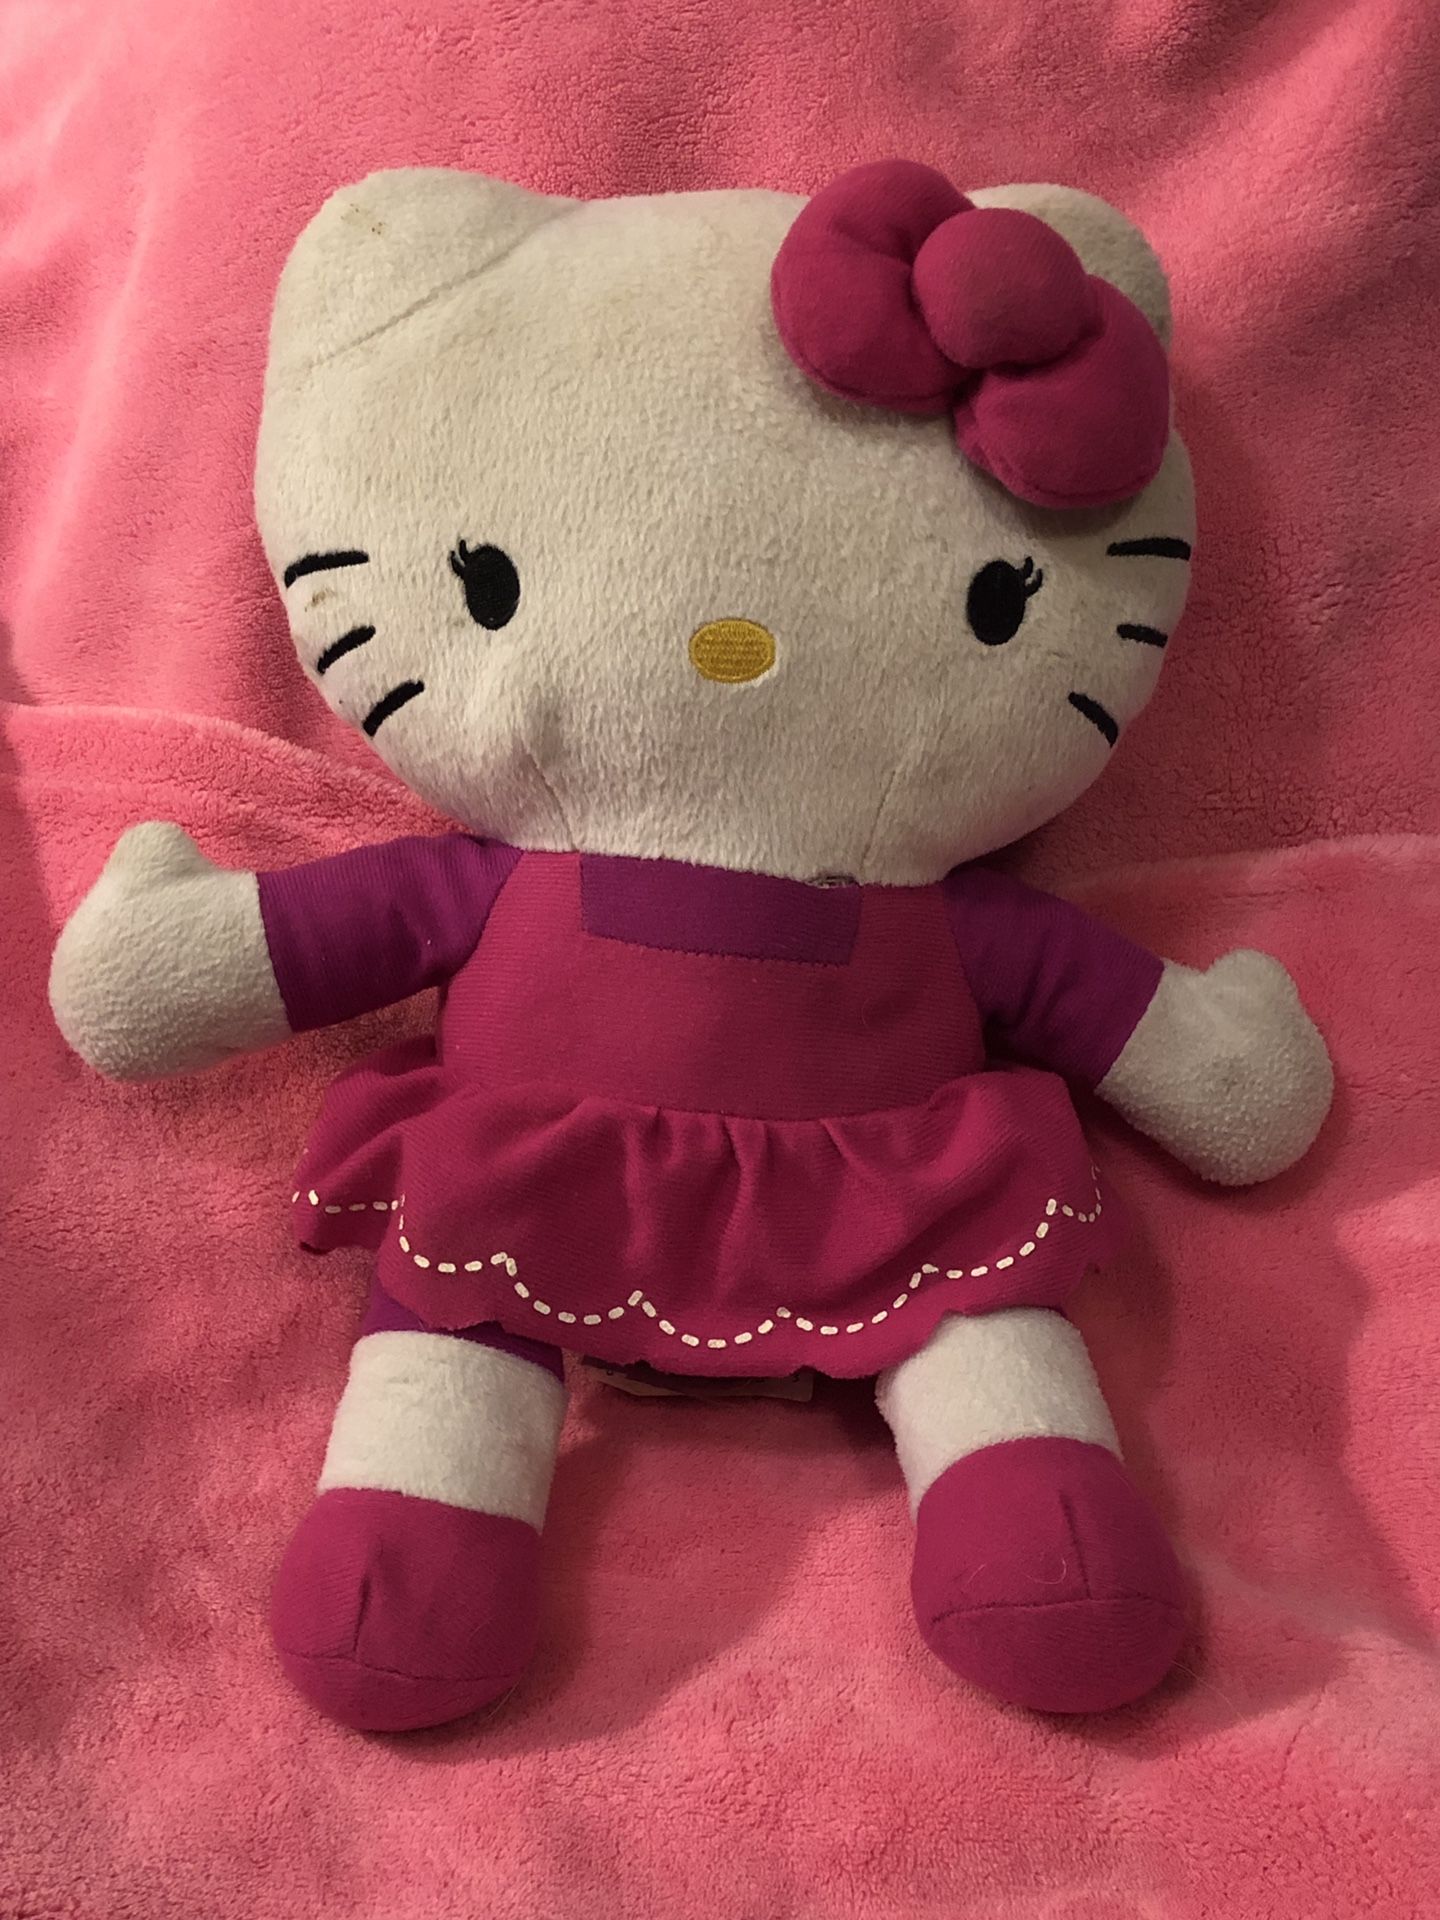 Free Hello Kitty jumbo plush doll - I give away toys and things on my page periodically ! 😍🥳🥳🥳🥳💕💕large 14” tall! Free